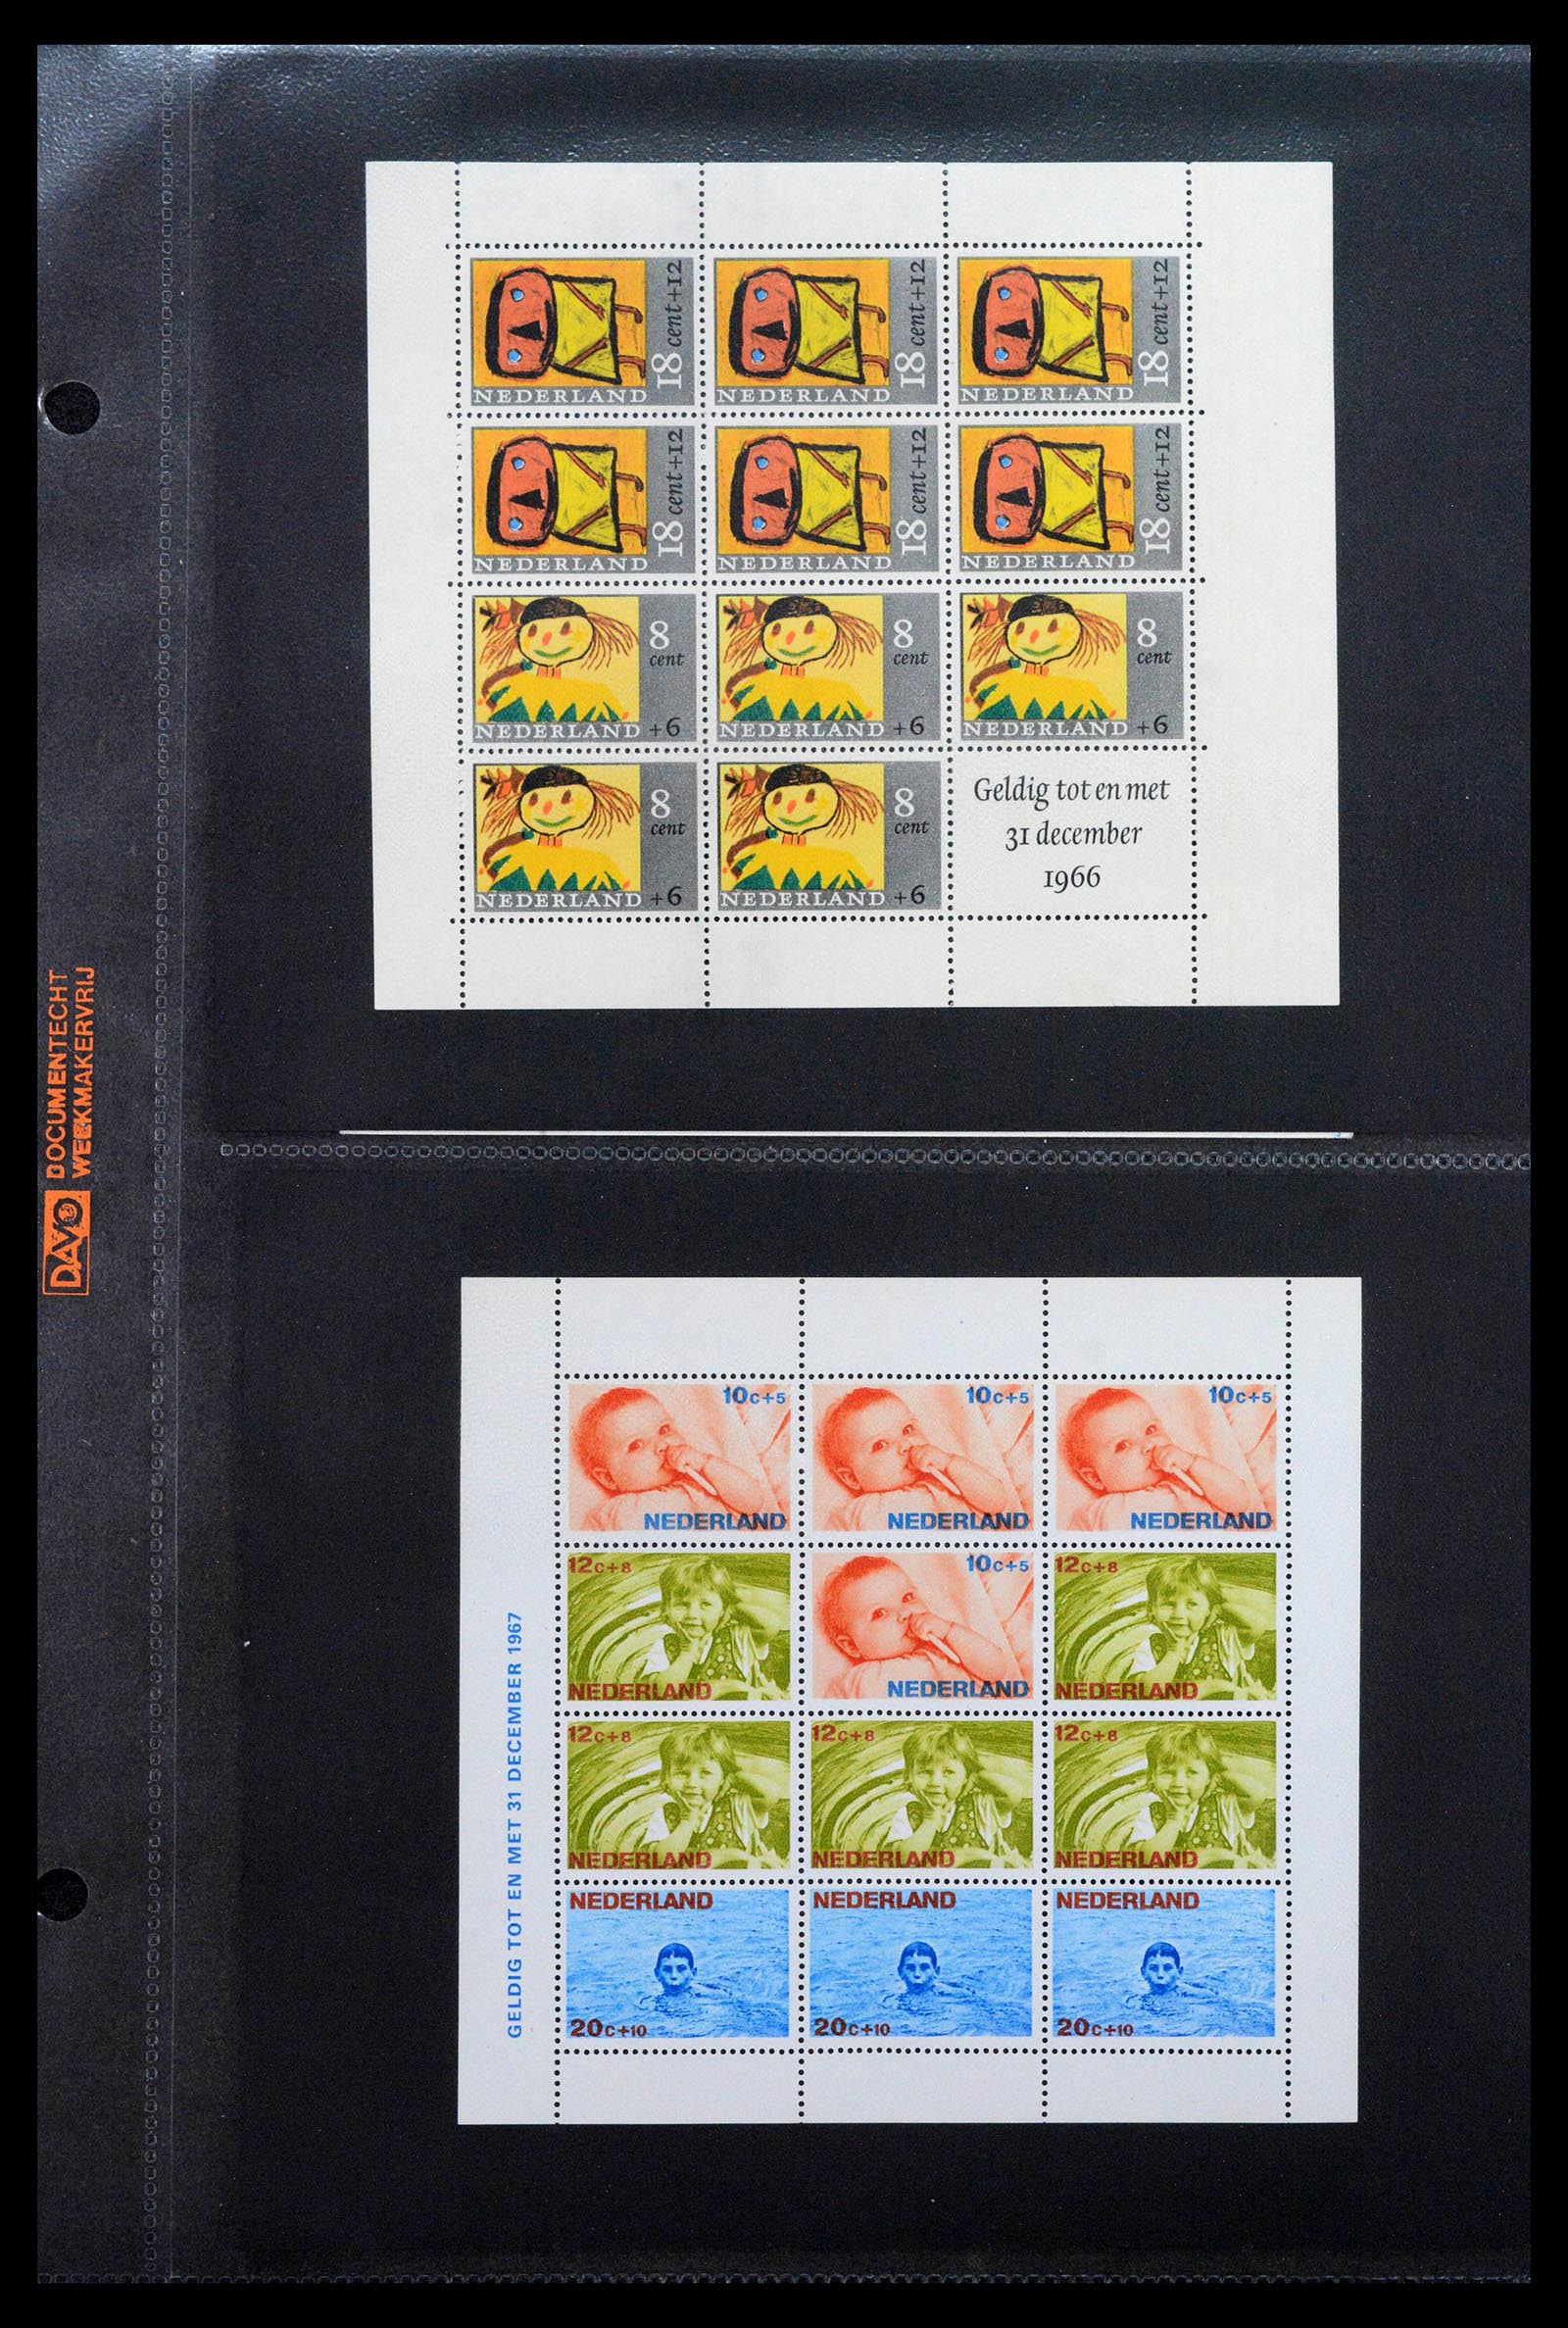 39041 0027 - Stamp collection 39041 Netherlands first day covers 1950-1977.